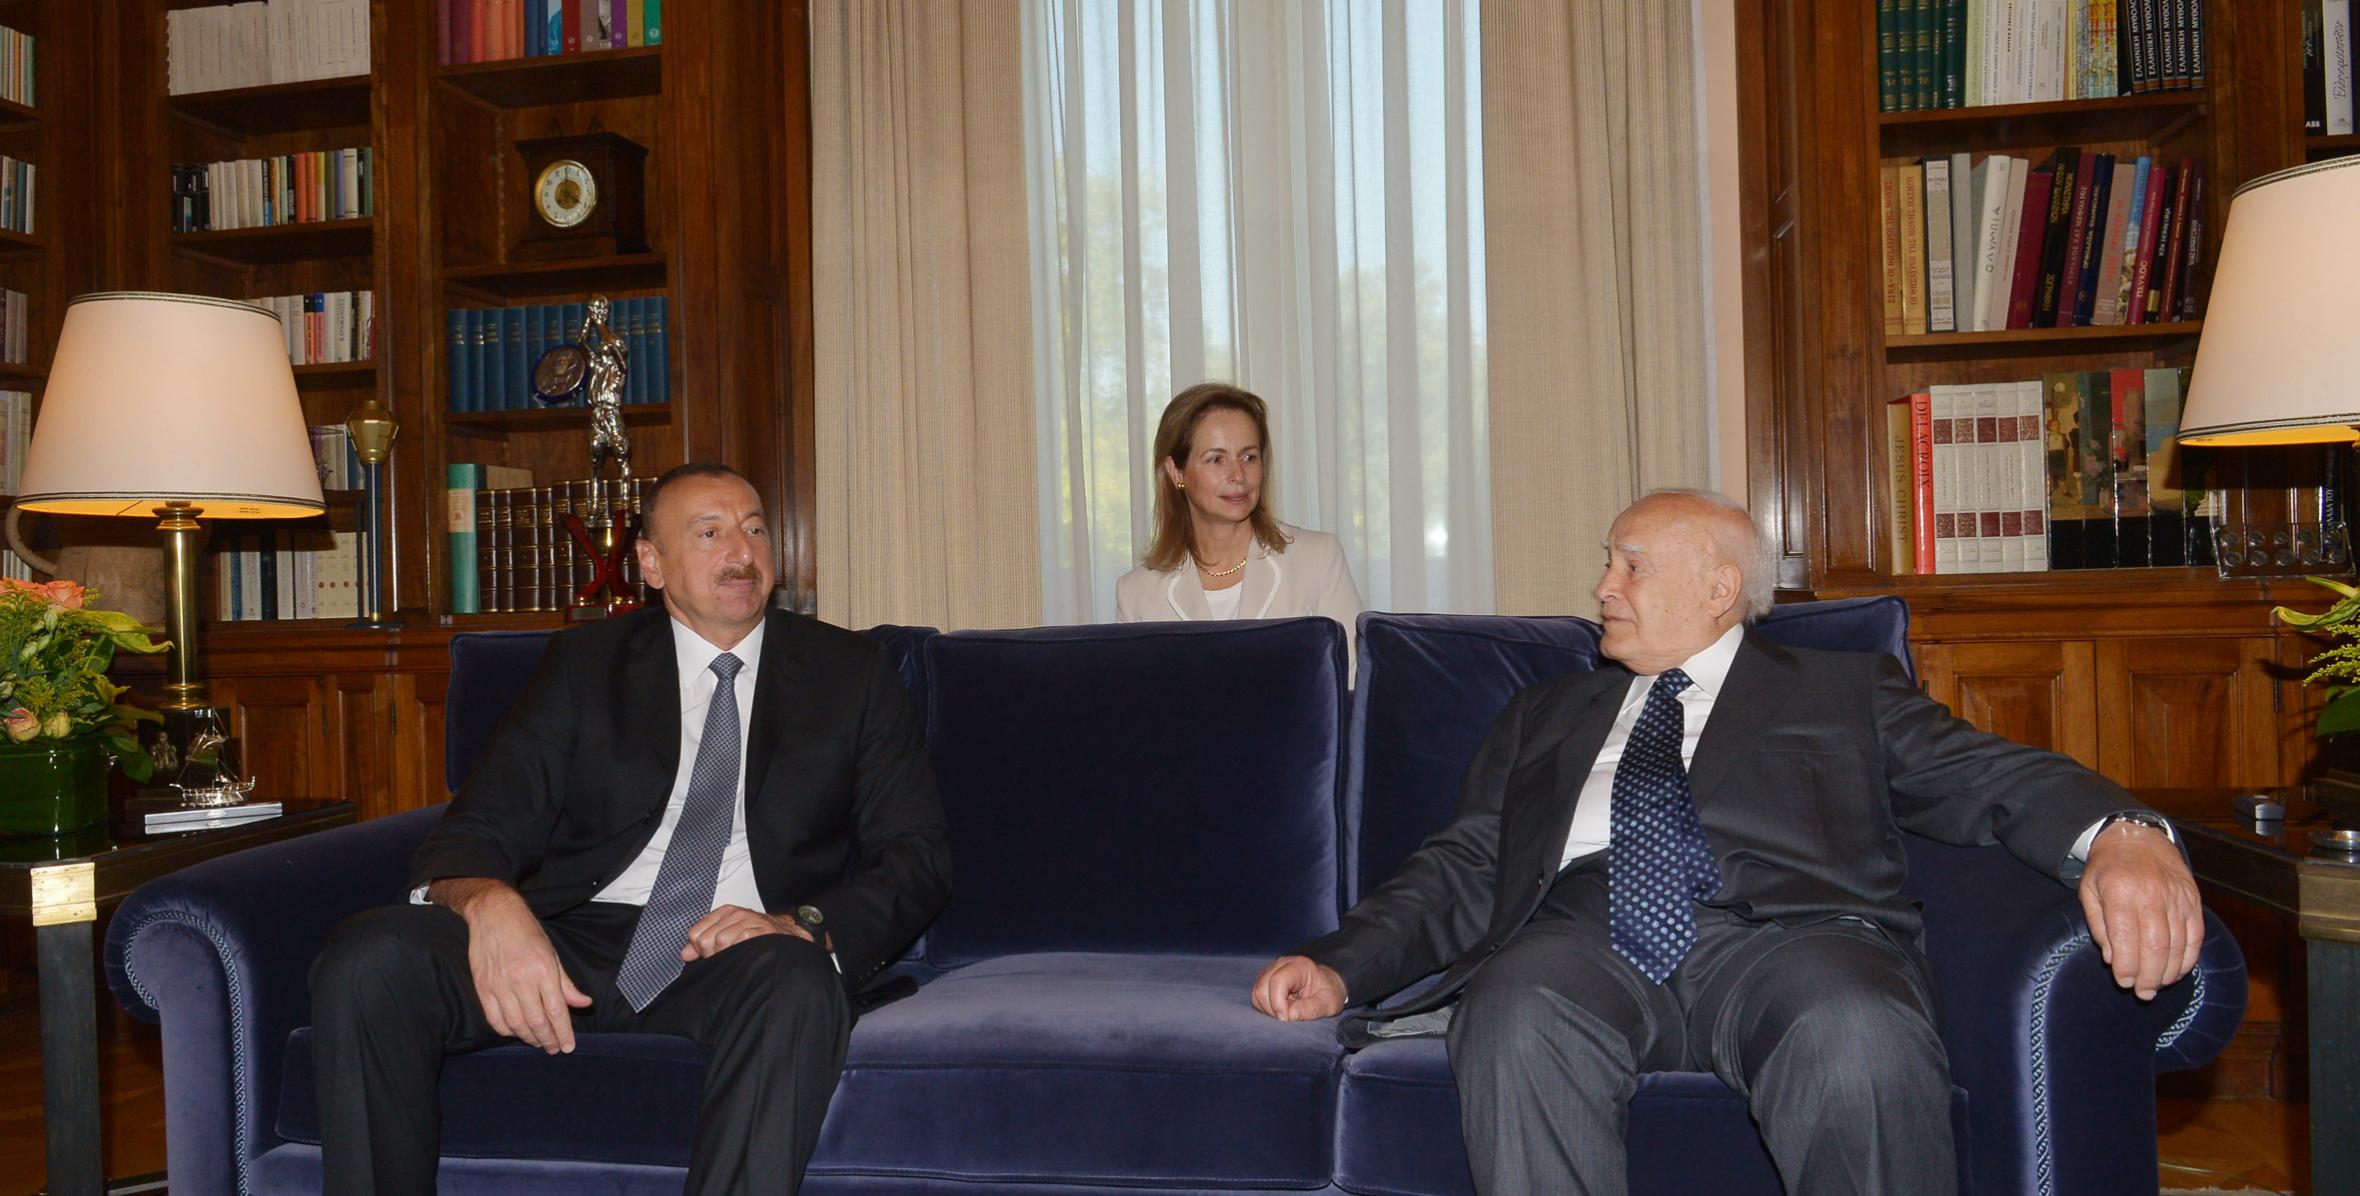 Ilham Aliyev held a one-on-one meeting with President of Greece Karolos Papoulias